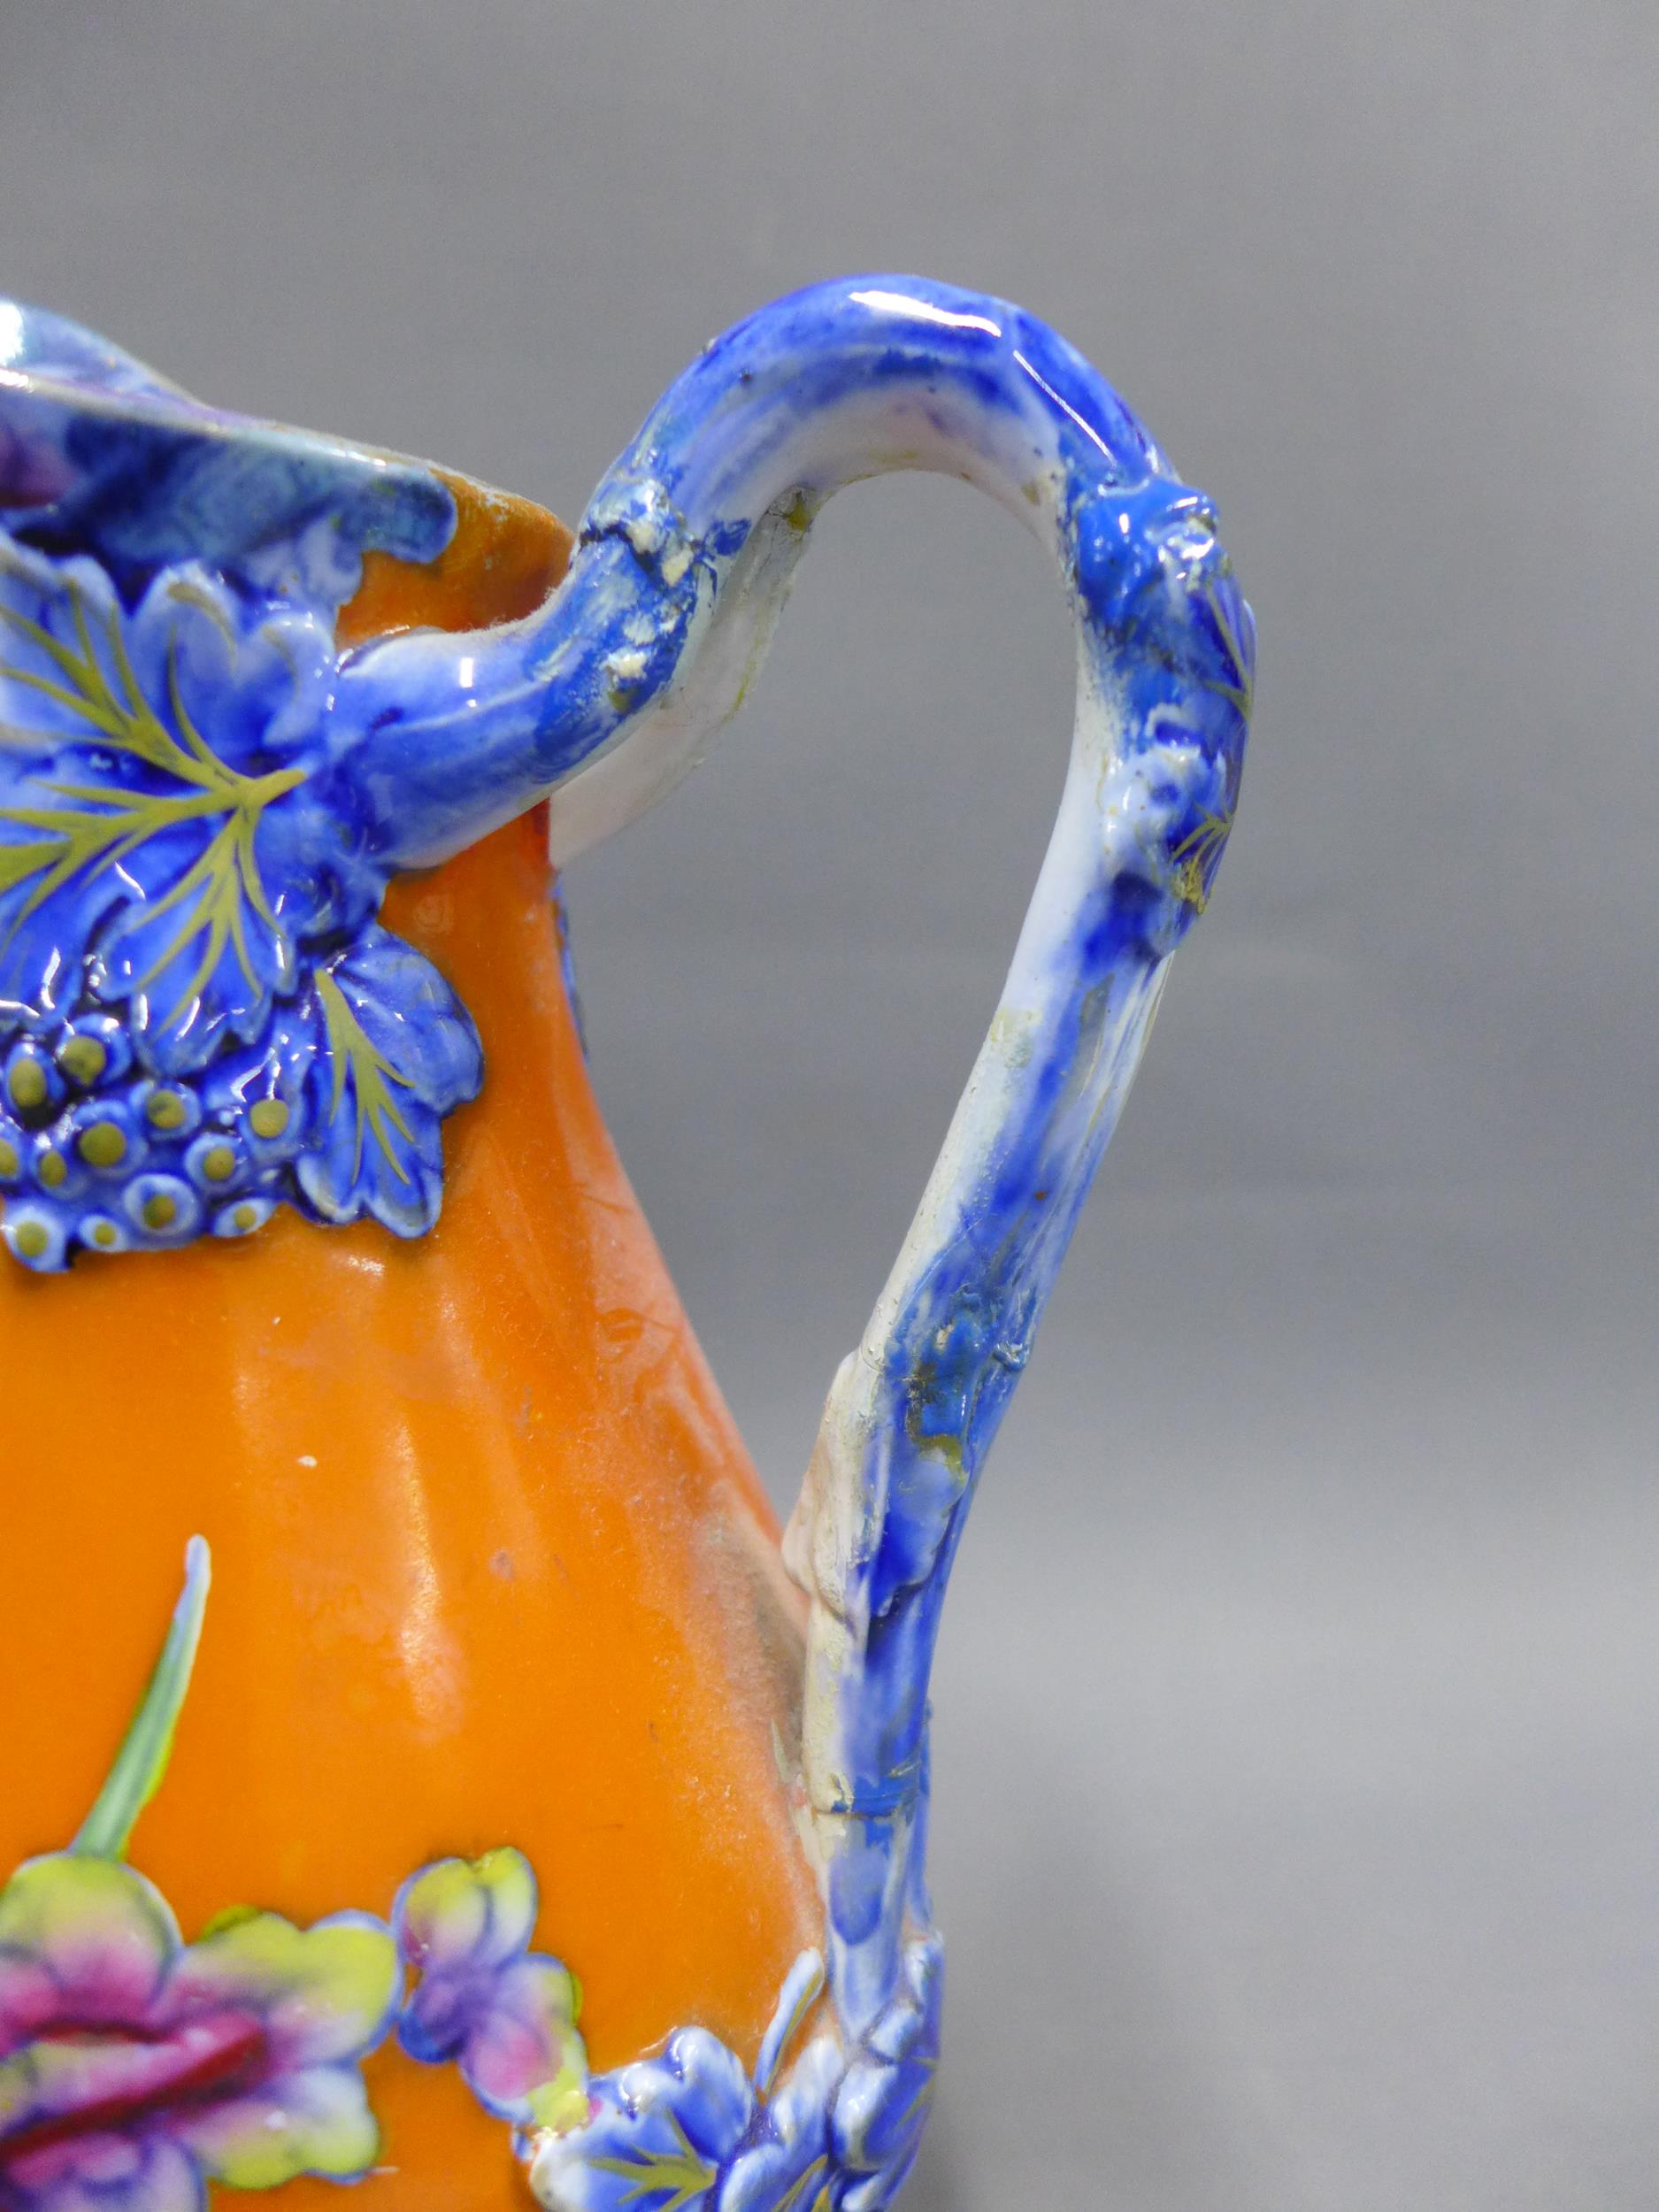 Rosenthal Versace Voyage de Marco Polo porcelain vase, a Victorian chinoiserie pattern jug with a - Image 3 of 4